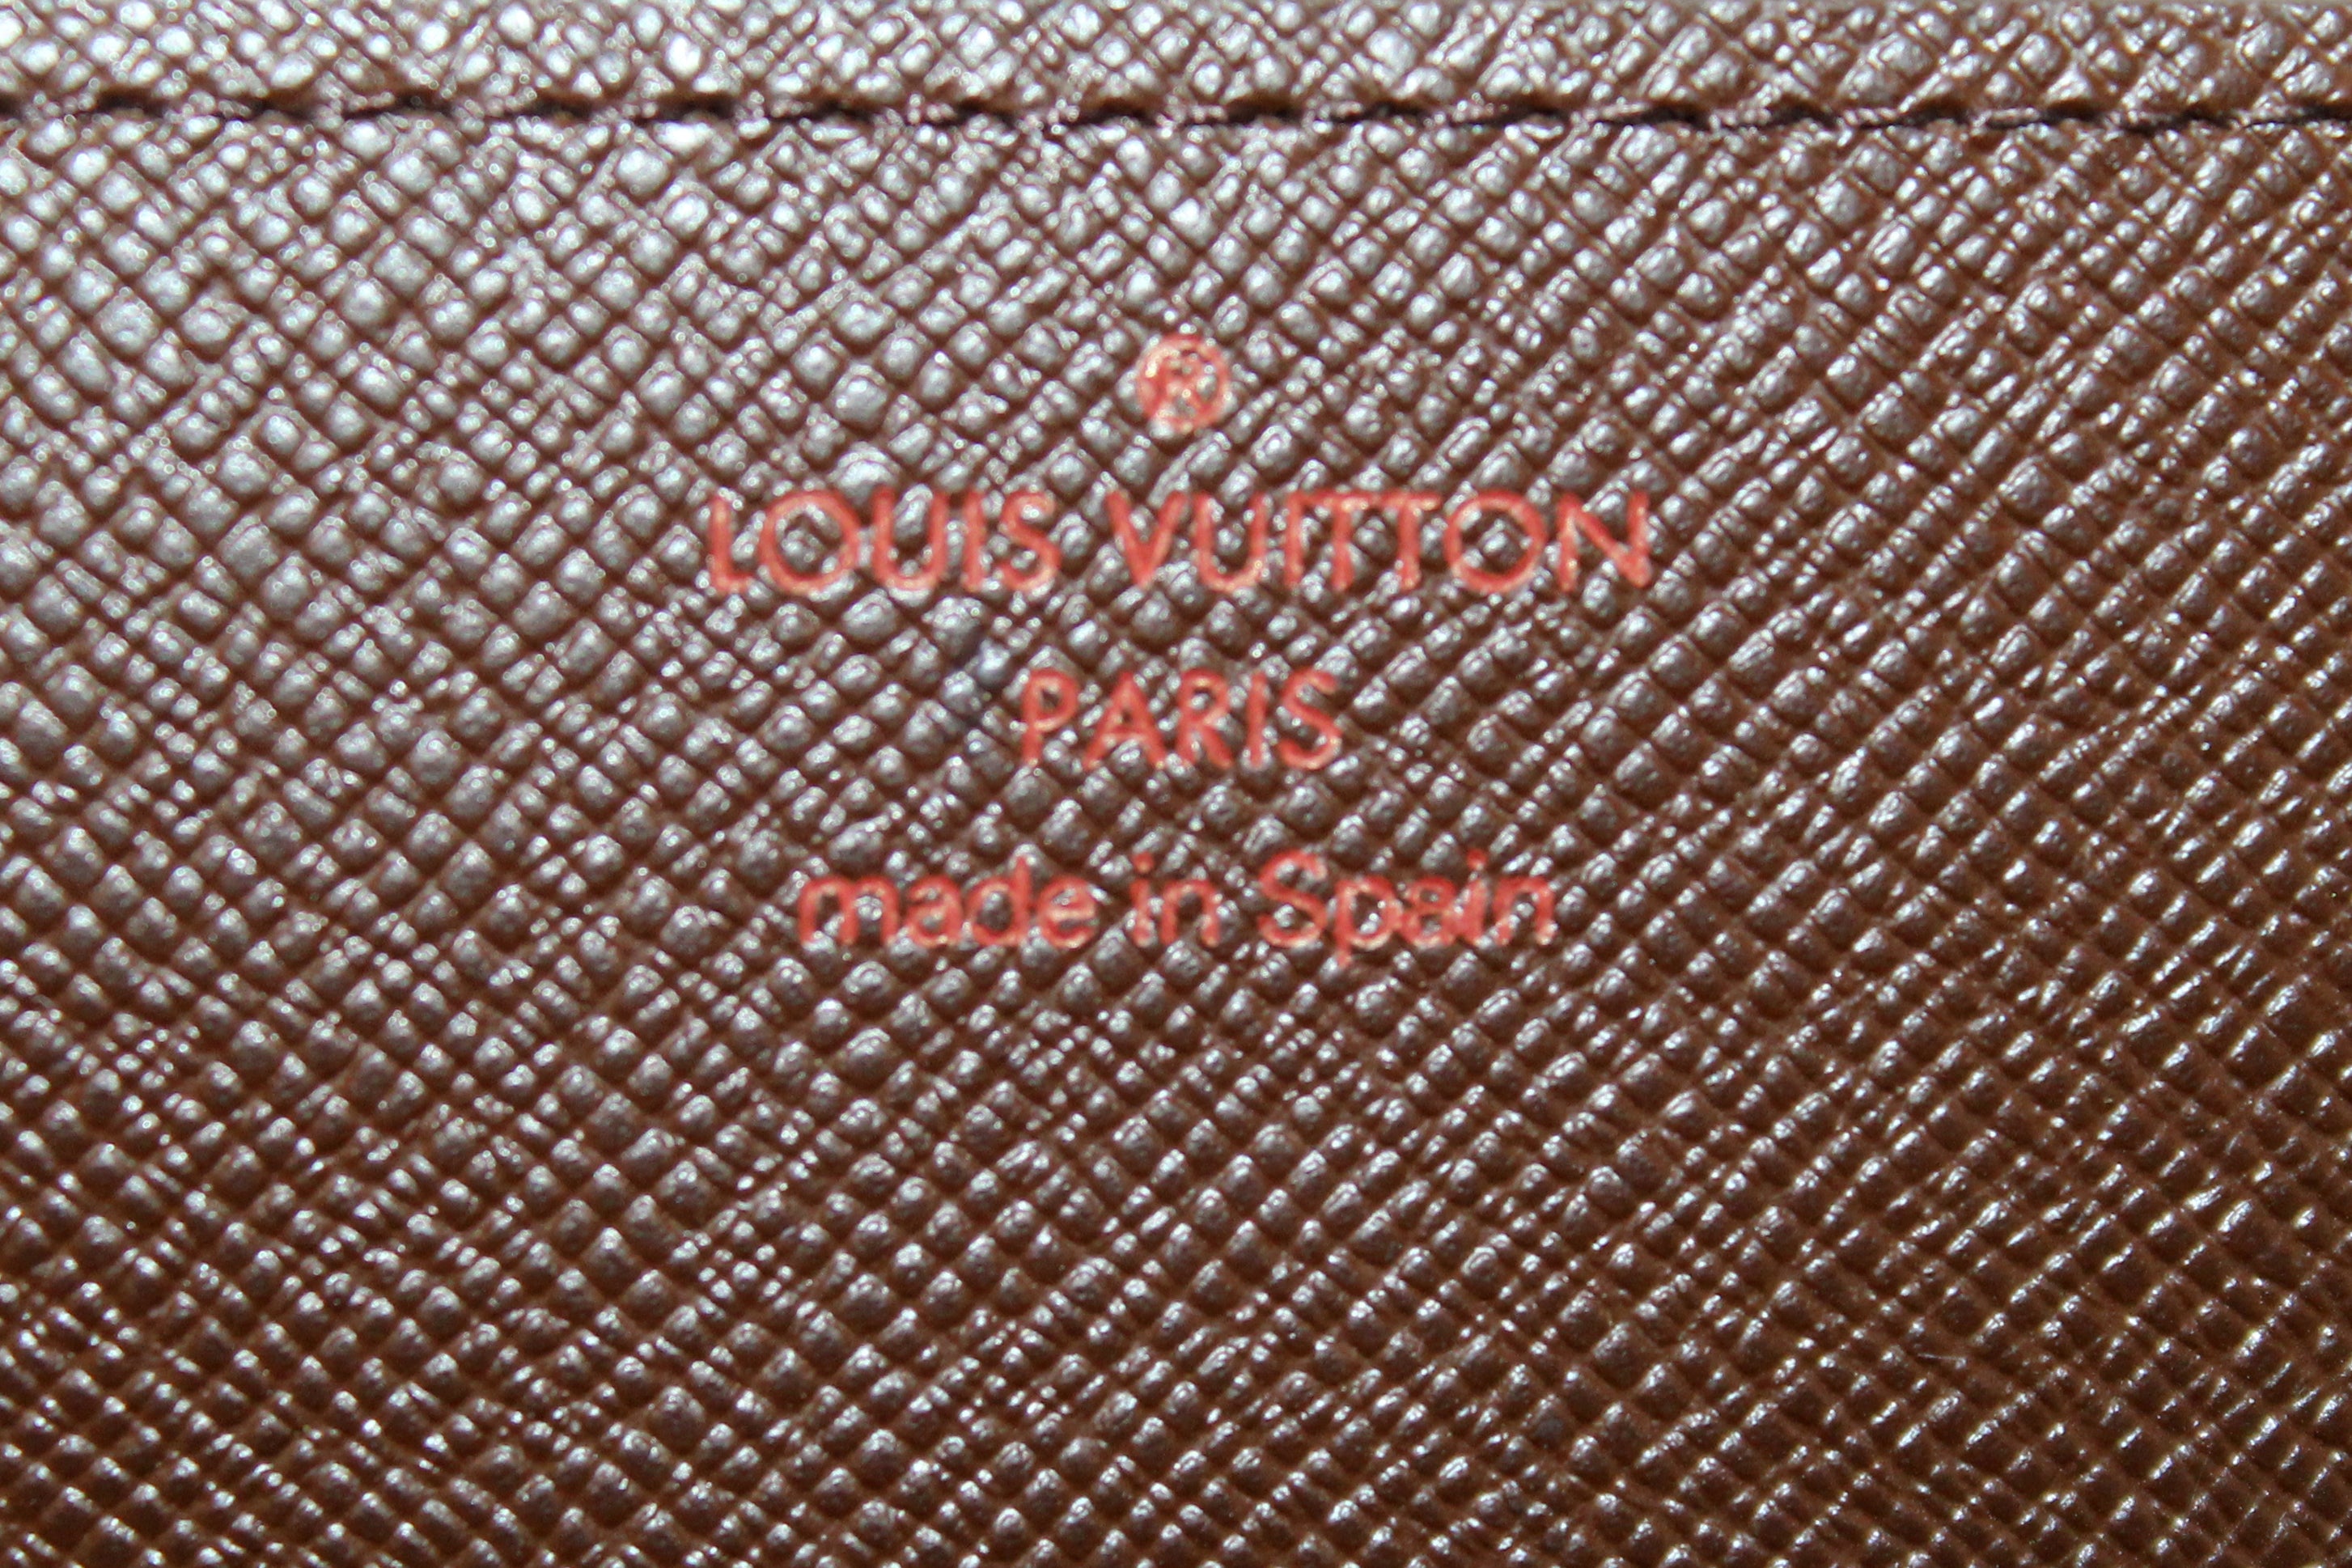 Authentic Louis Vuitton Damier Ebene Canvas Card Holder – Italy Station